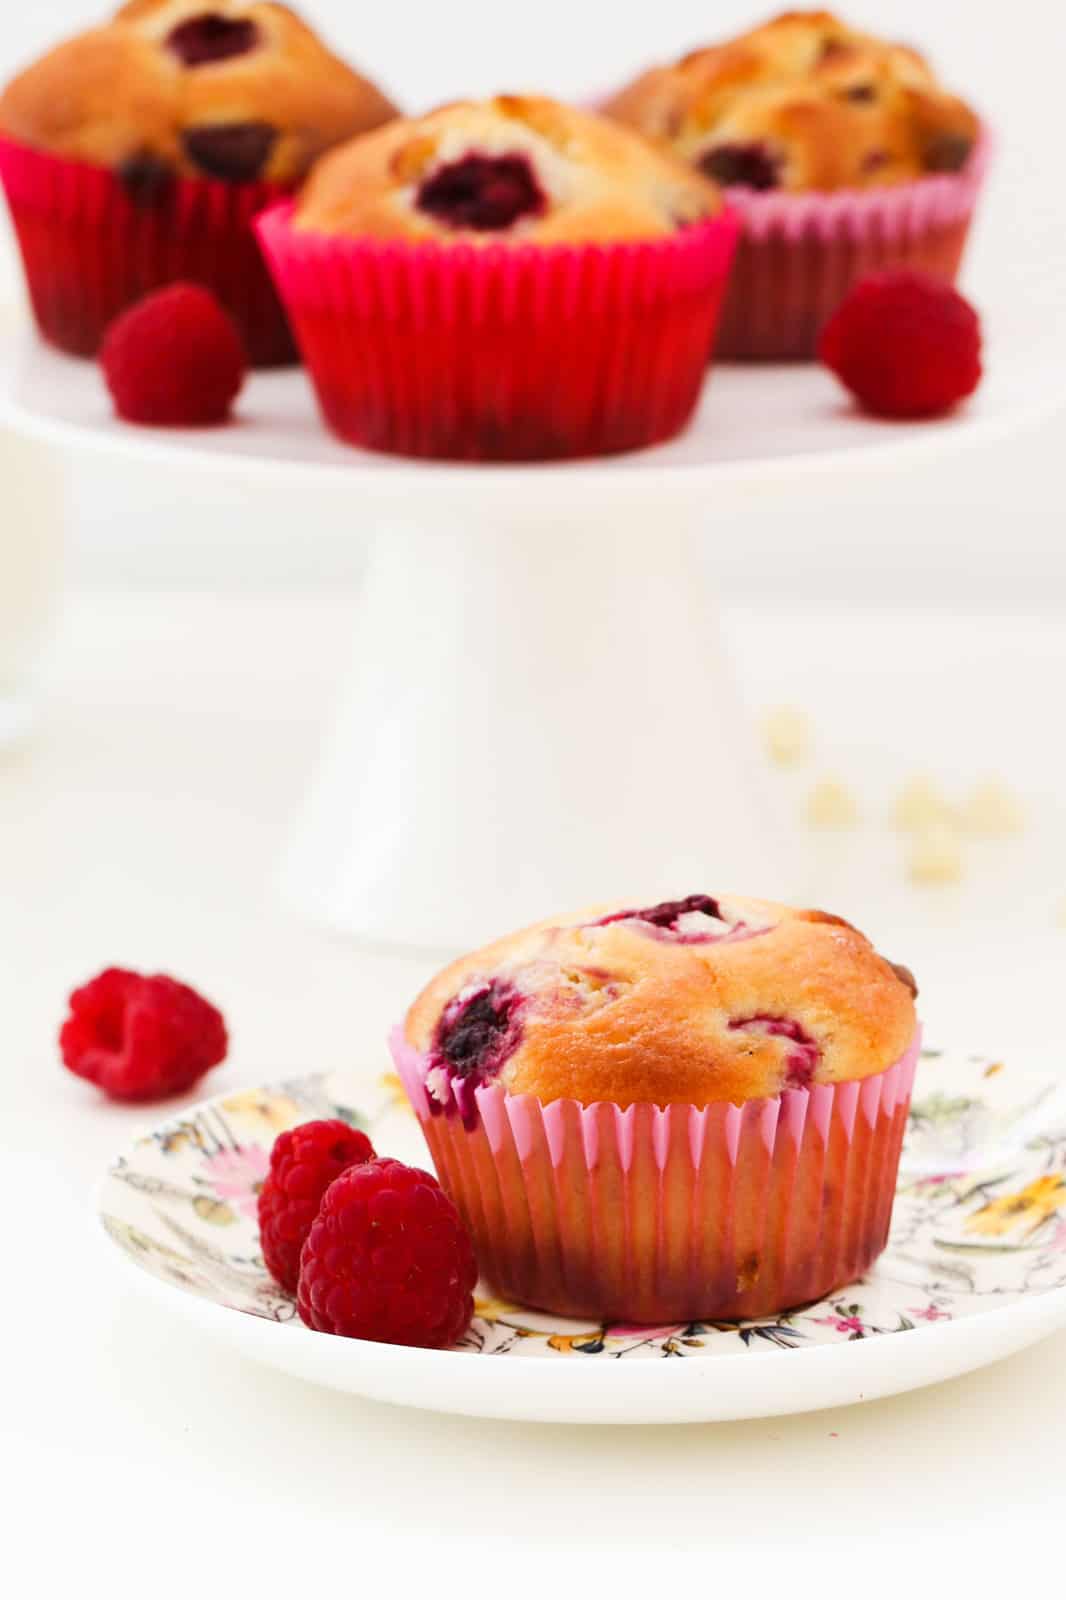 A raspberry muffin and some fresh raspberries on a floral plate in the foreground, and a blurred cake stand with three muffins in the background